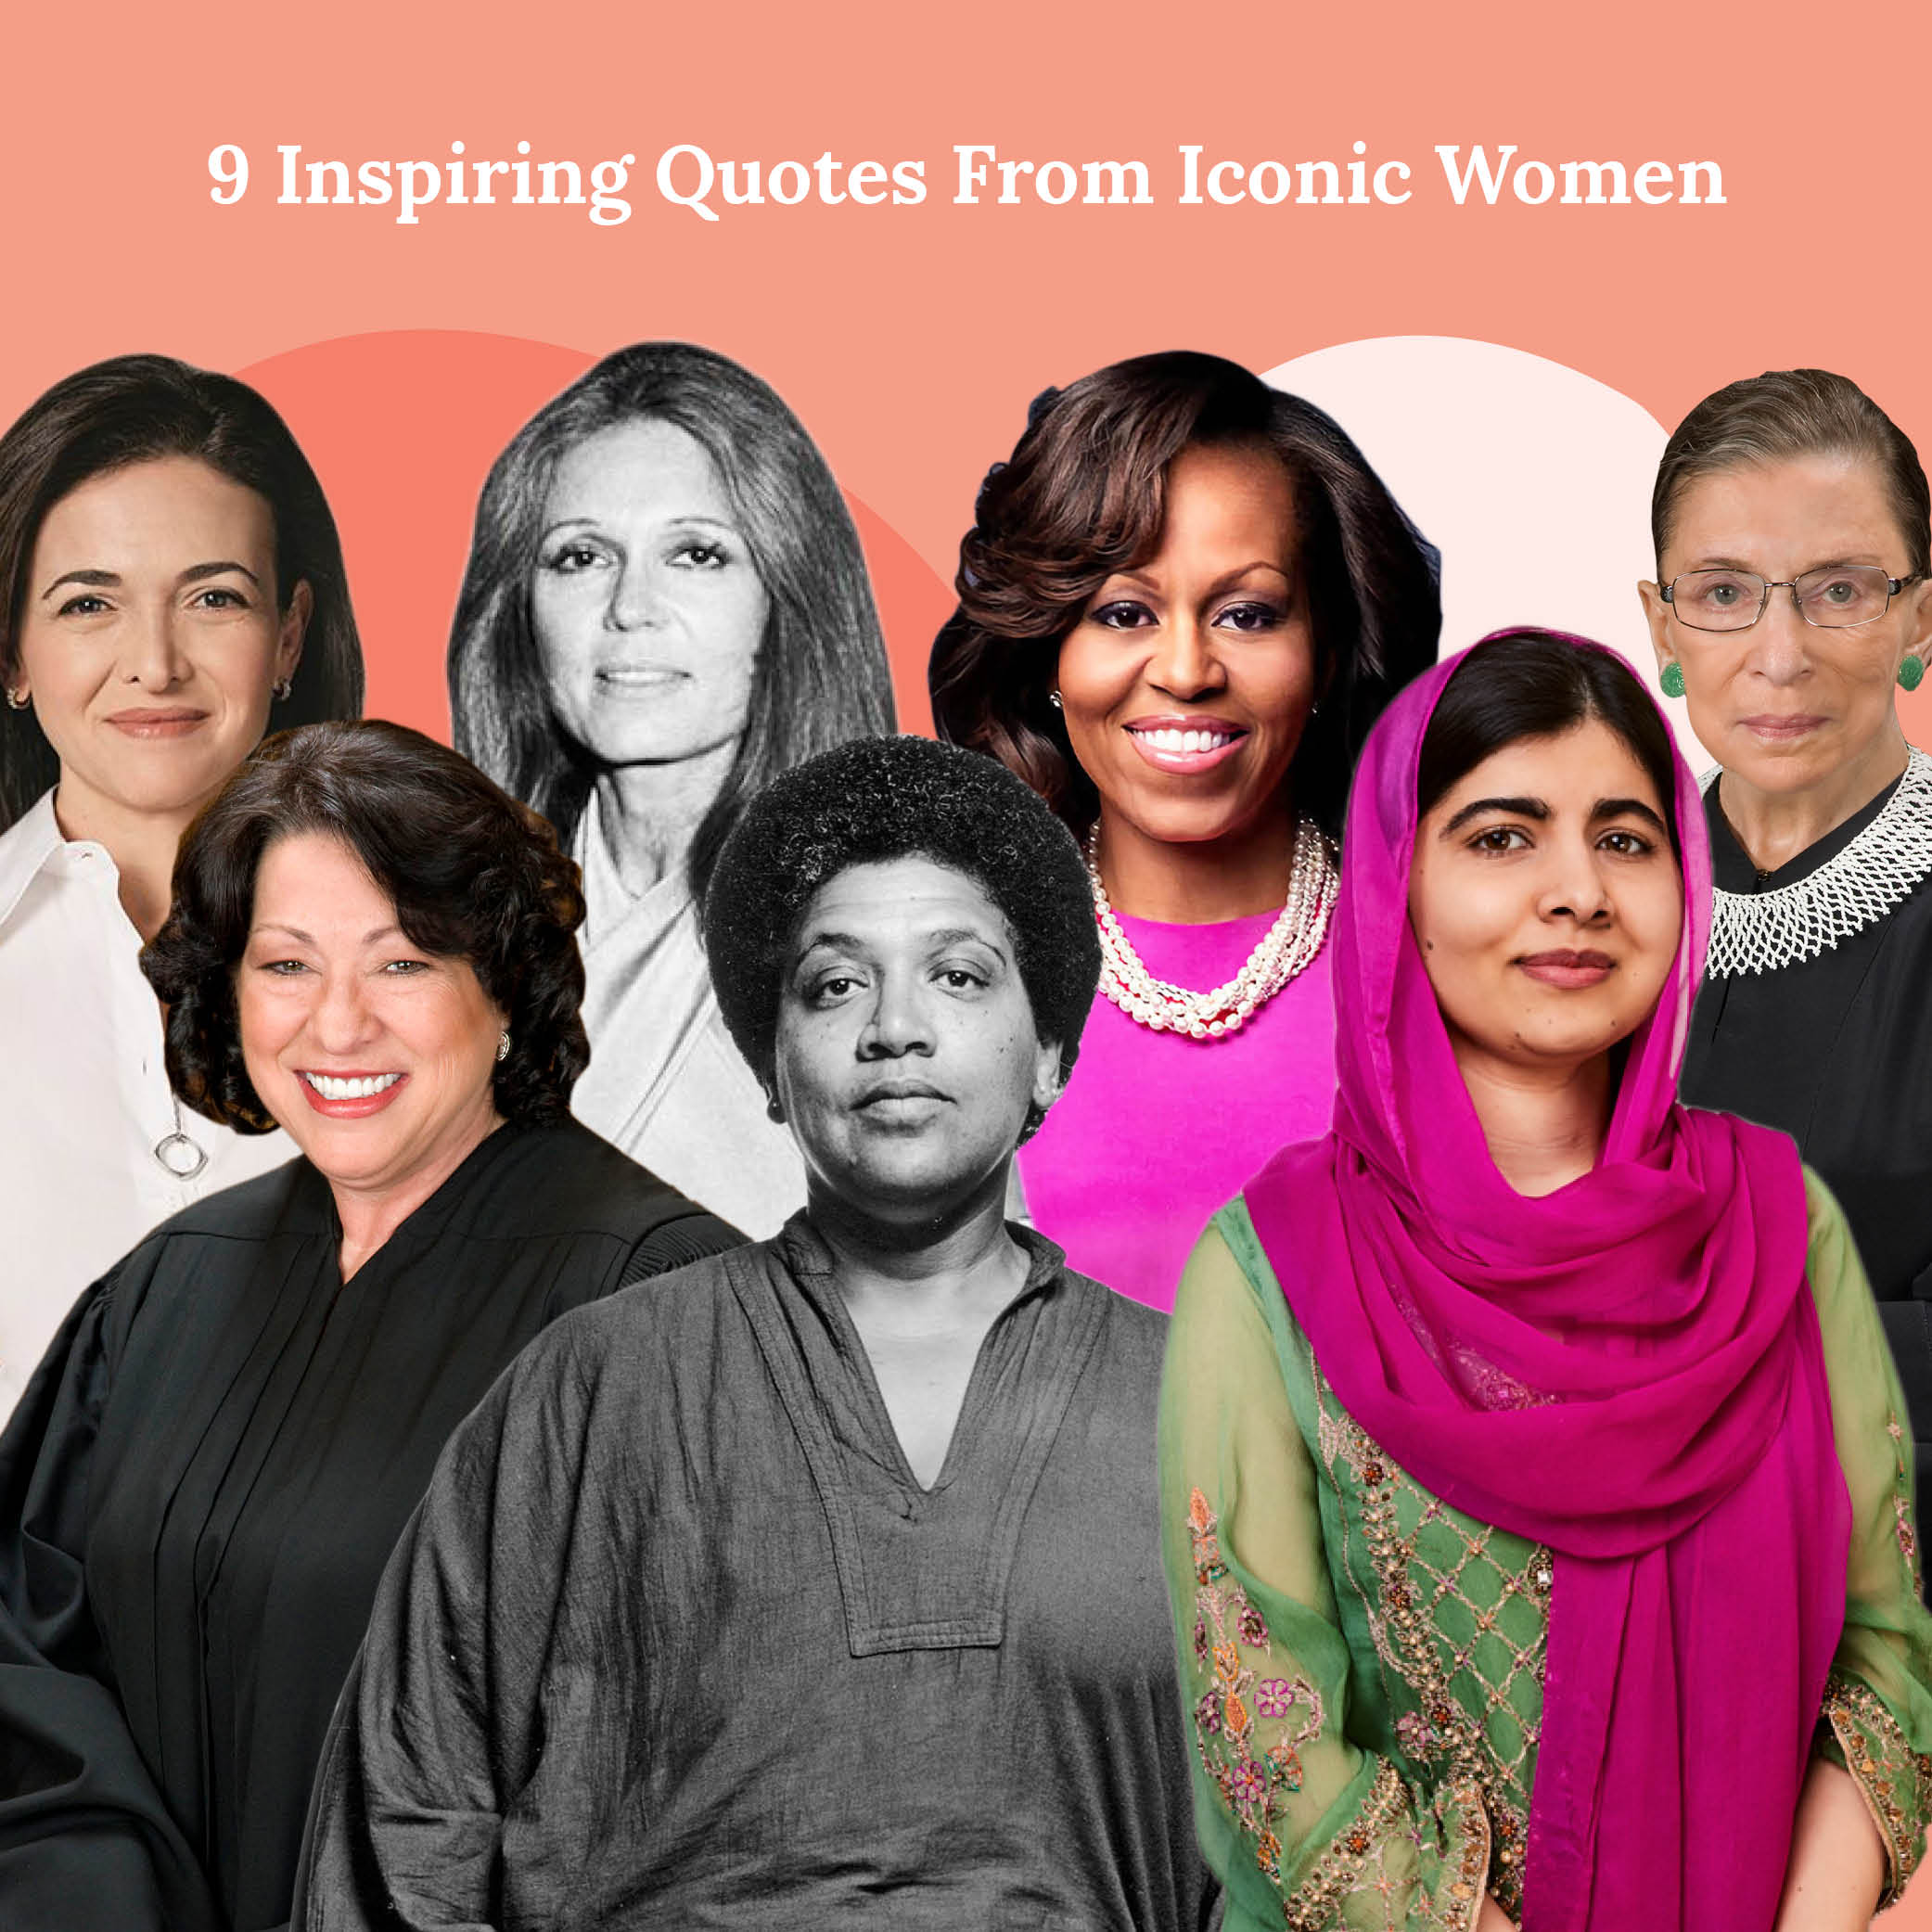 9 Inspiring Quotes for Women's Equality Day